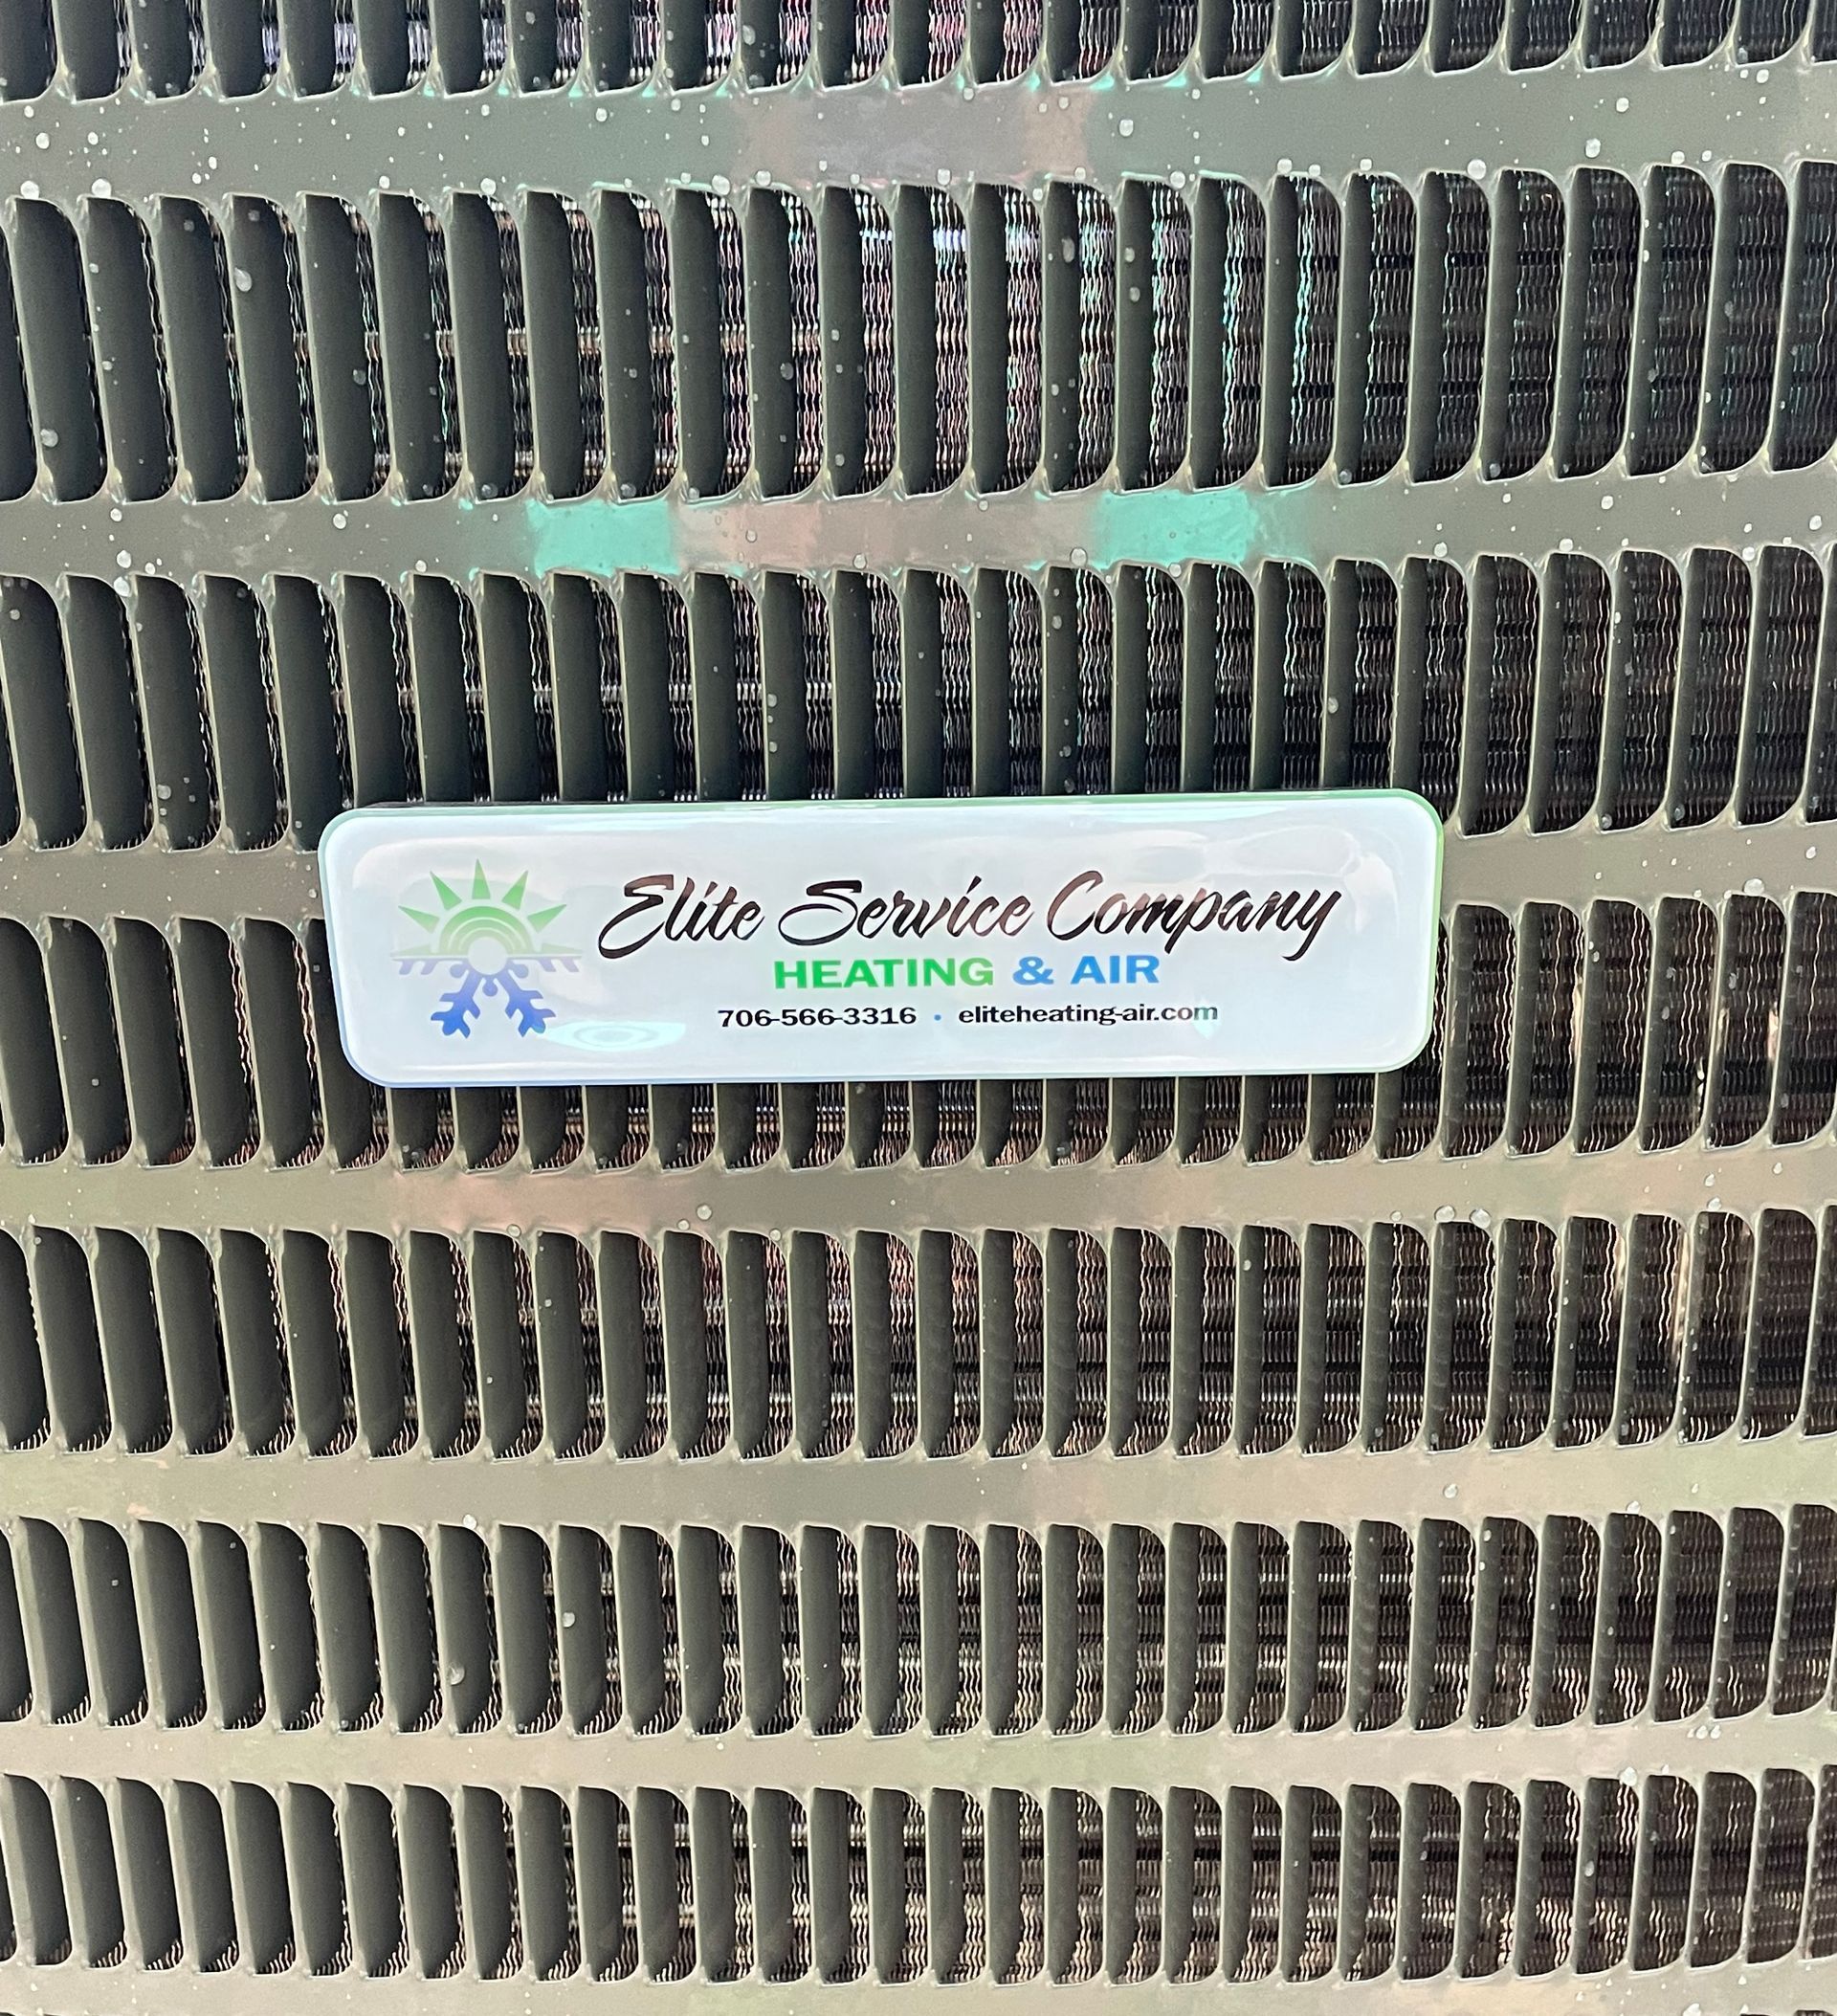 A close up of a radiator with a label on it that says elite service company.